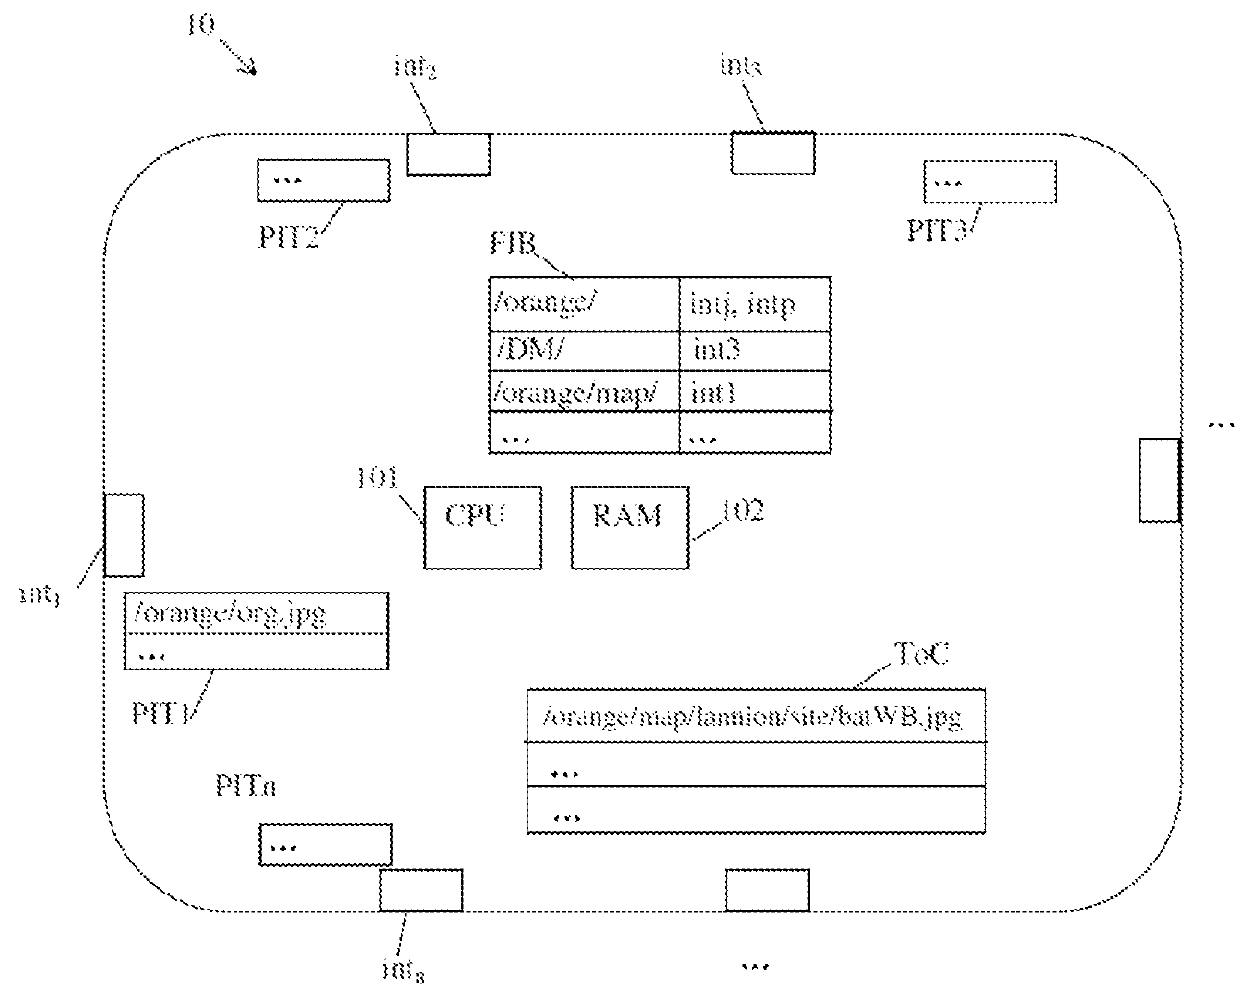 Method for processing a request in an information-centric communication network